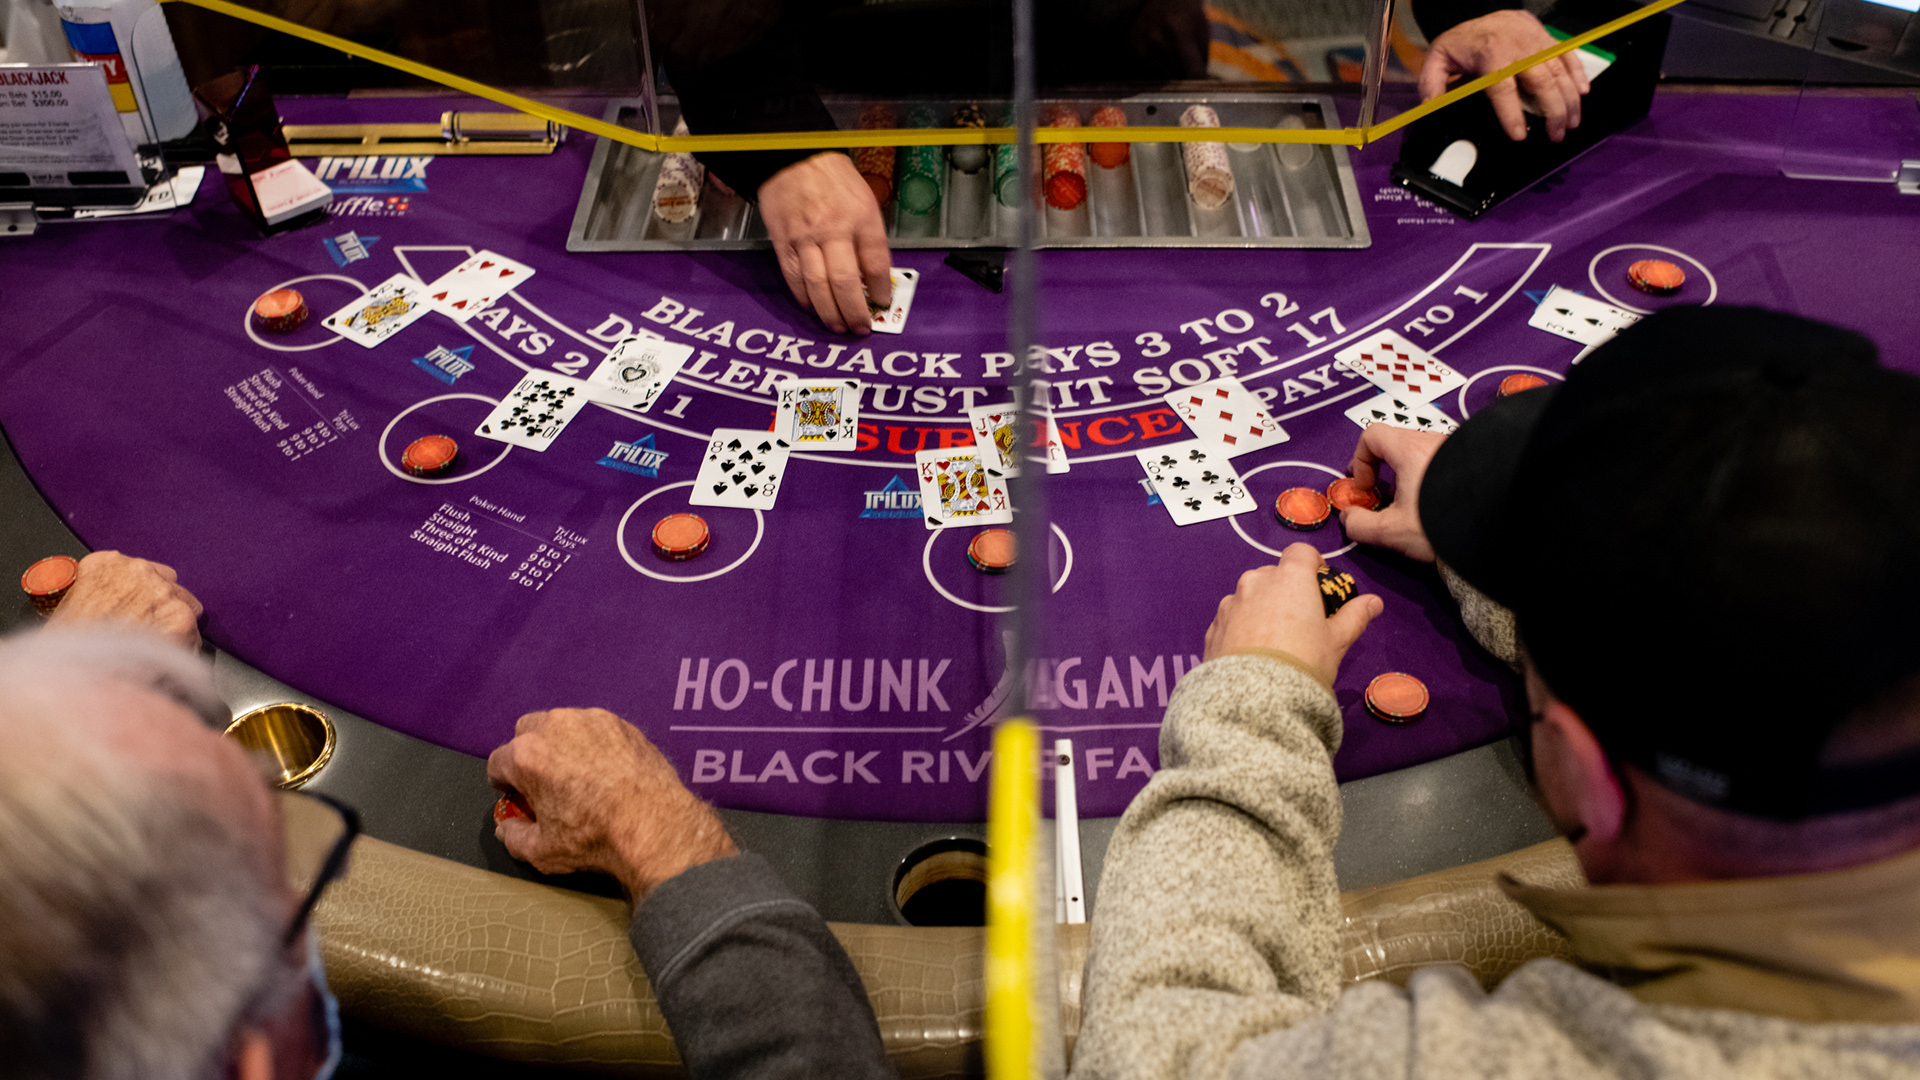 An overhead photo shows two people leaning over a blackjack table with cards and chips.